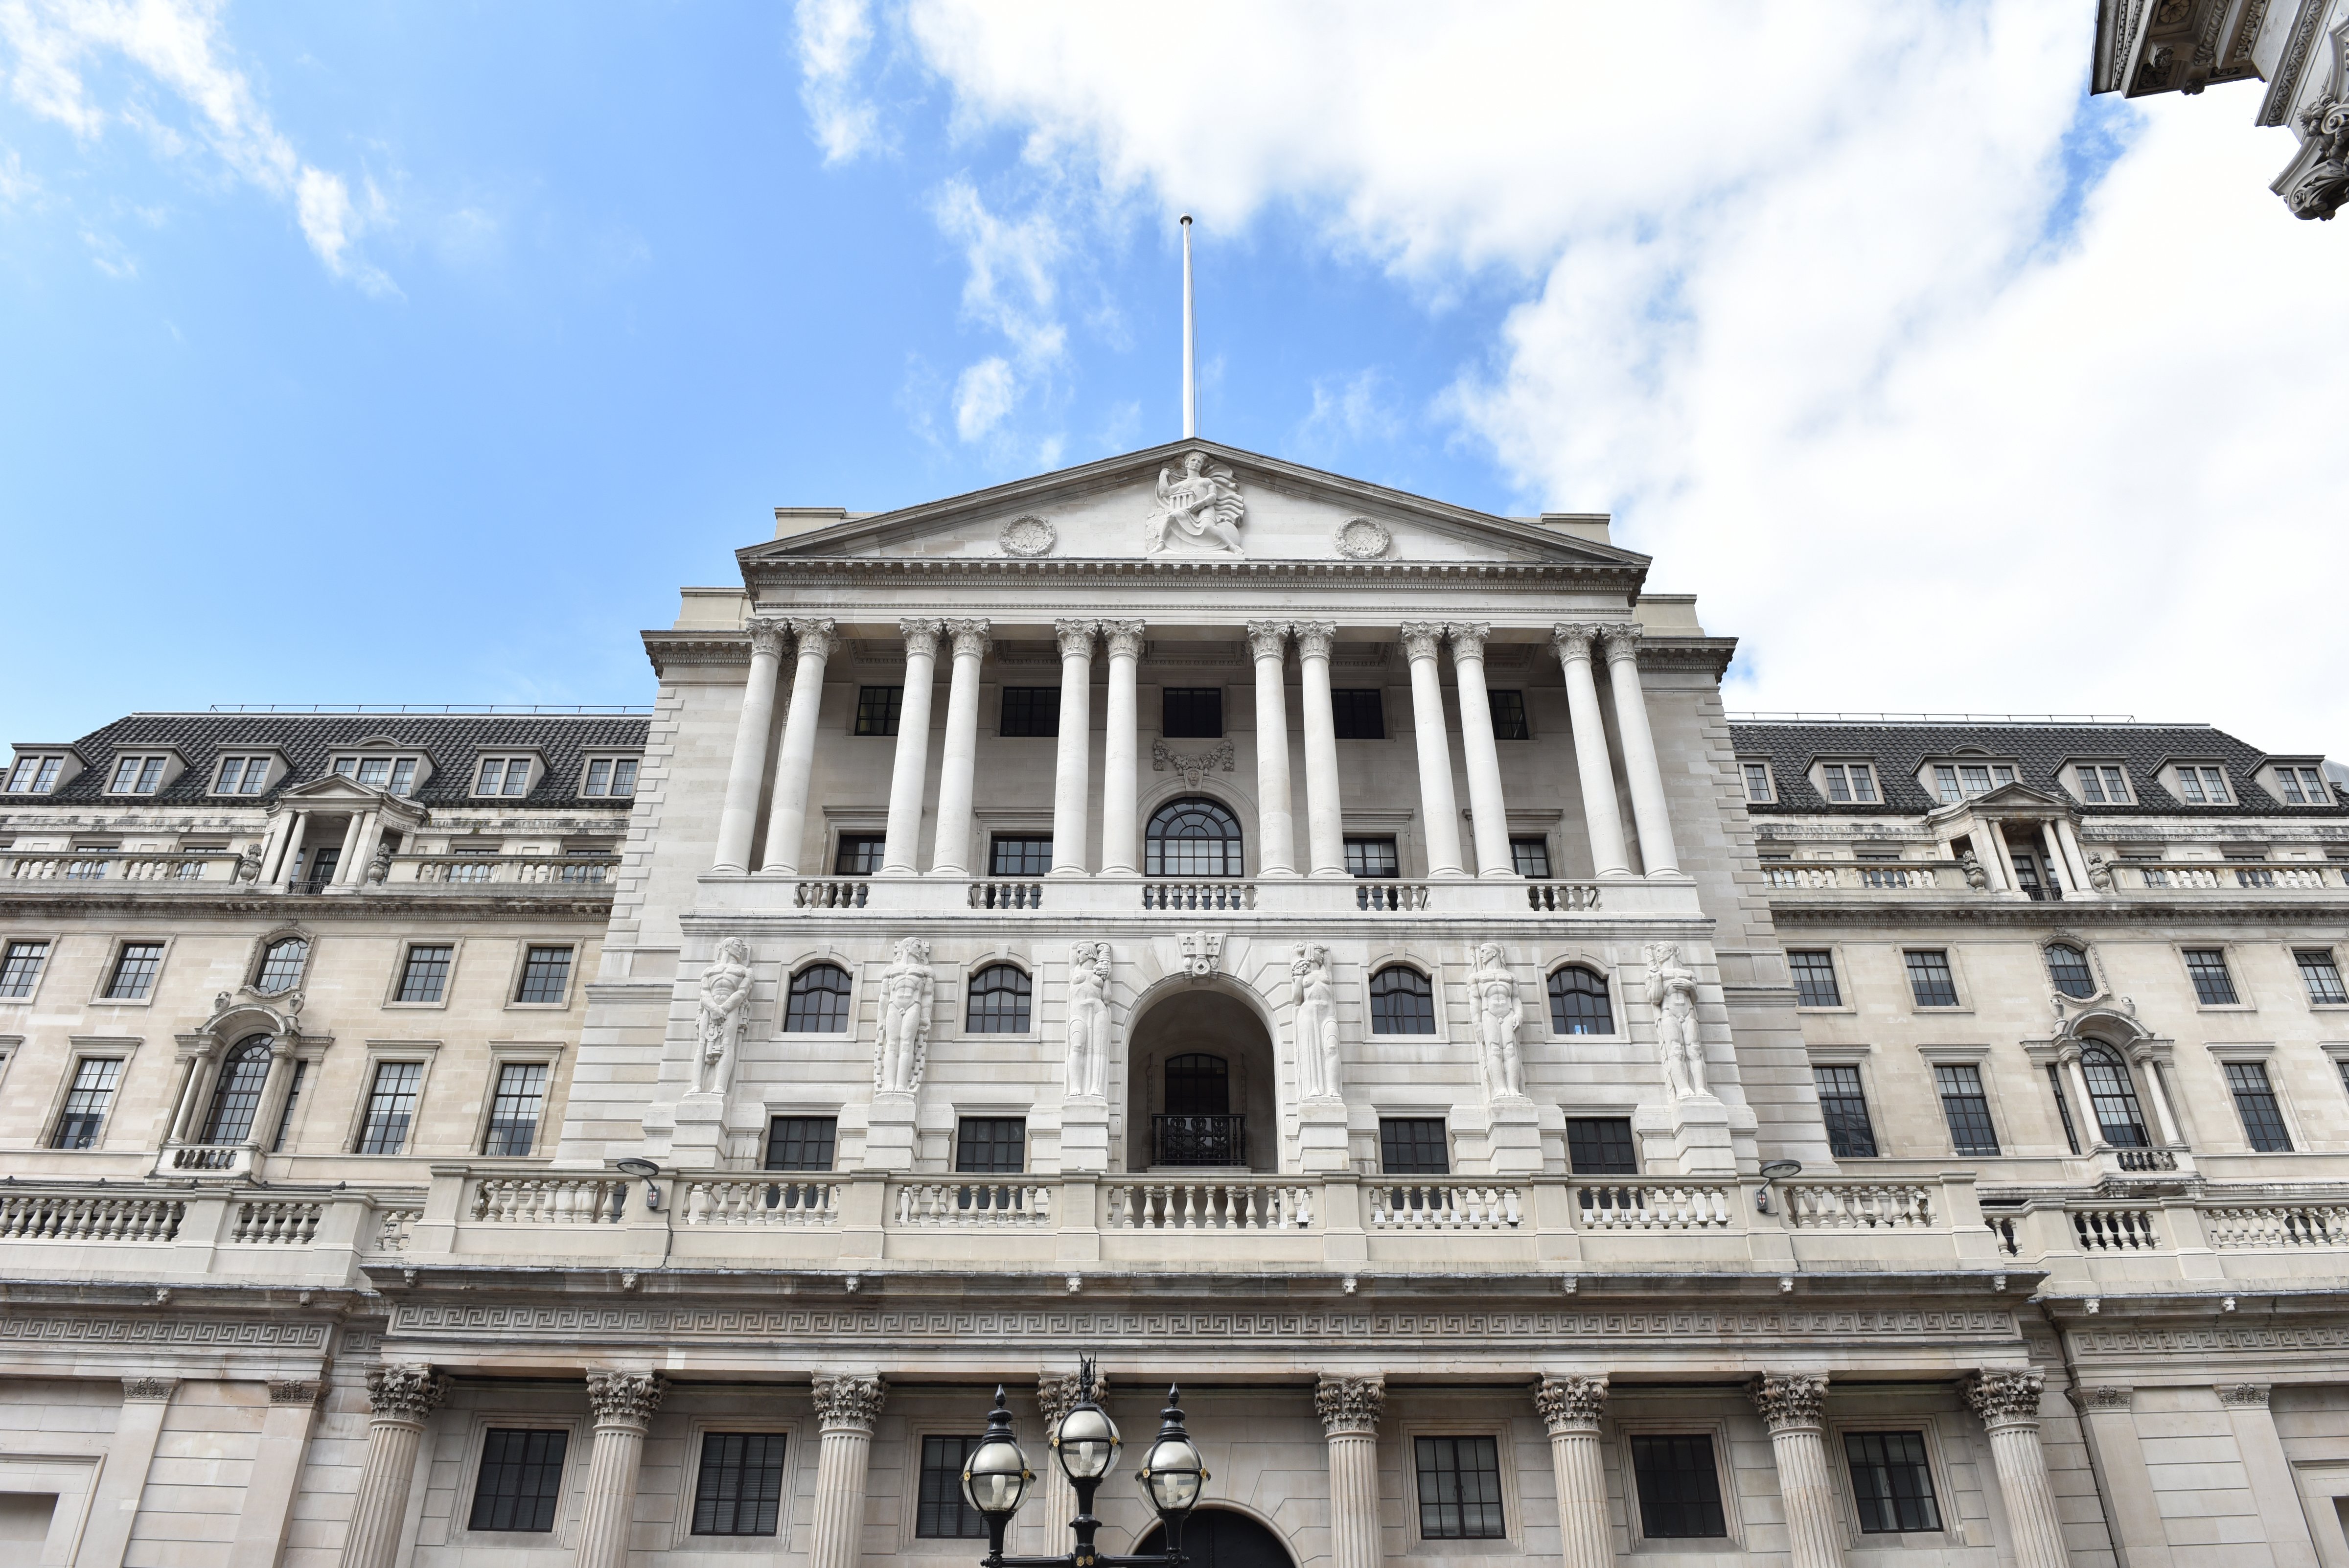 LONDON, UNITED KINGDOM - MAY 13: A general view of the Bank of England on May 13, 2017 in London, England. (Photo by John Keeble/Getty Images) (John Keeble—Getty Images)